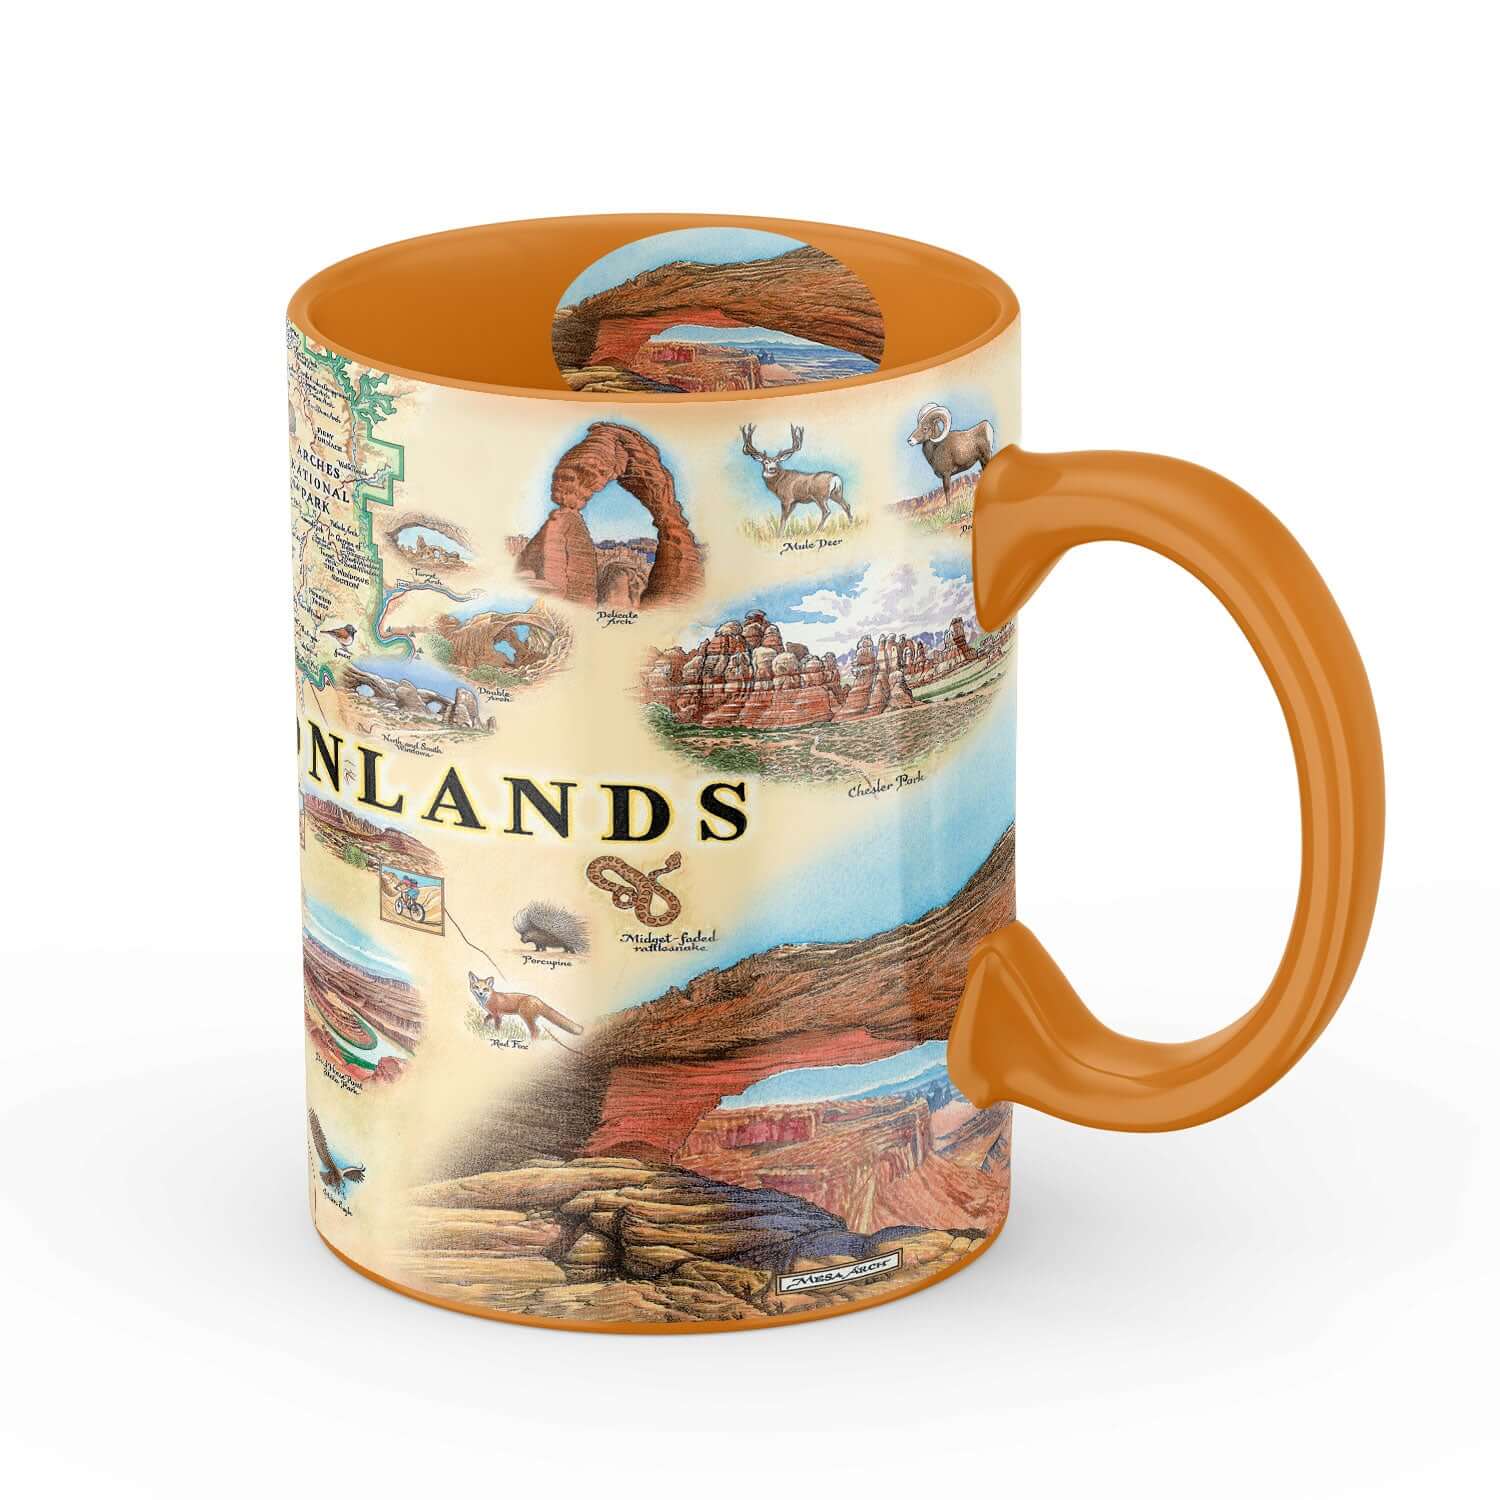 Arches & Canyonlands National Park ceramic mug  in earth tone colors. Featuring Deer, elk, mountain lion, flowers, eagle, canyons. 